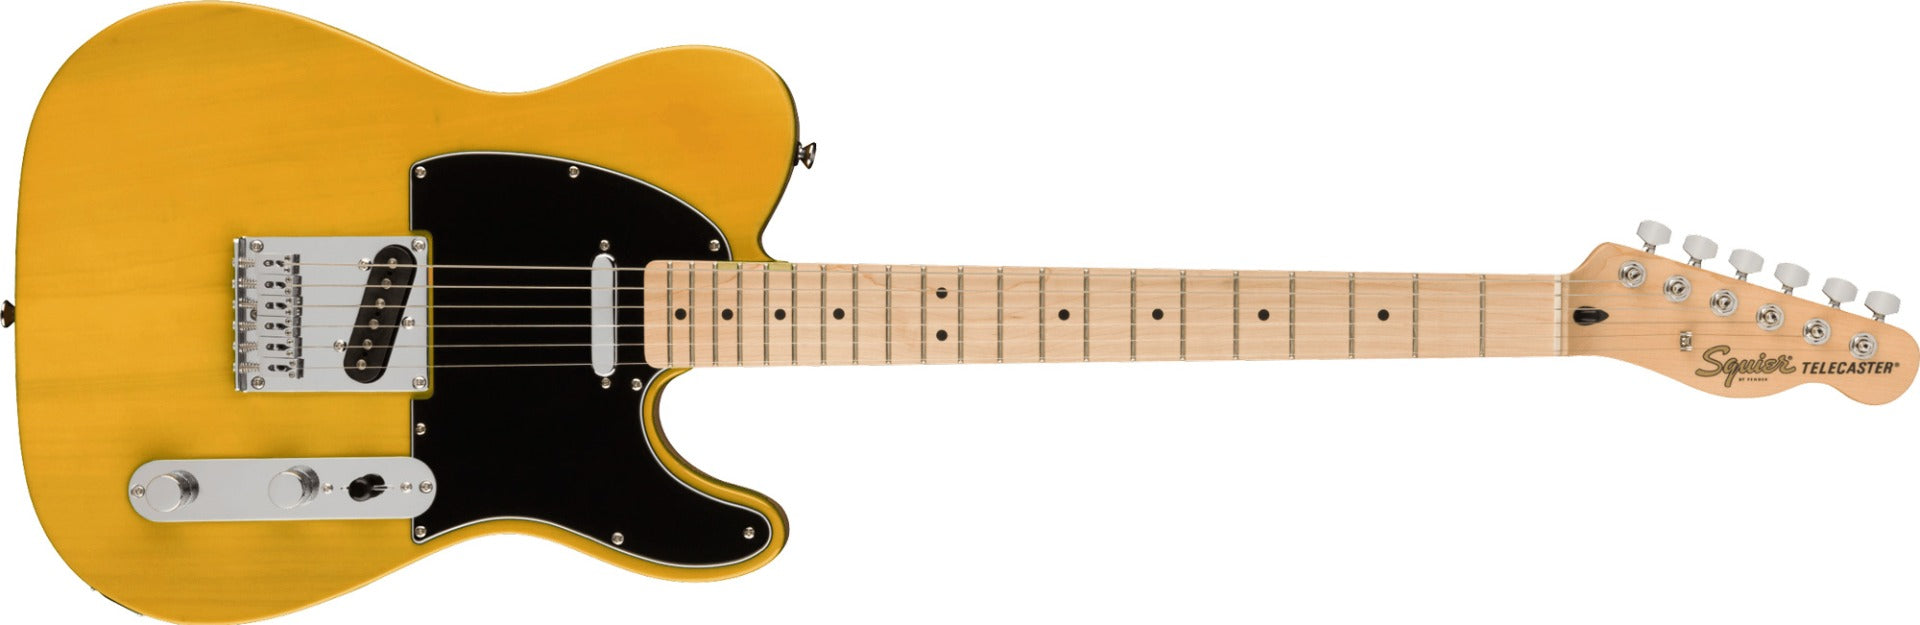 Squier Affinity Telecaster - Maple, Butterscotch Blonde - view 2